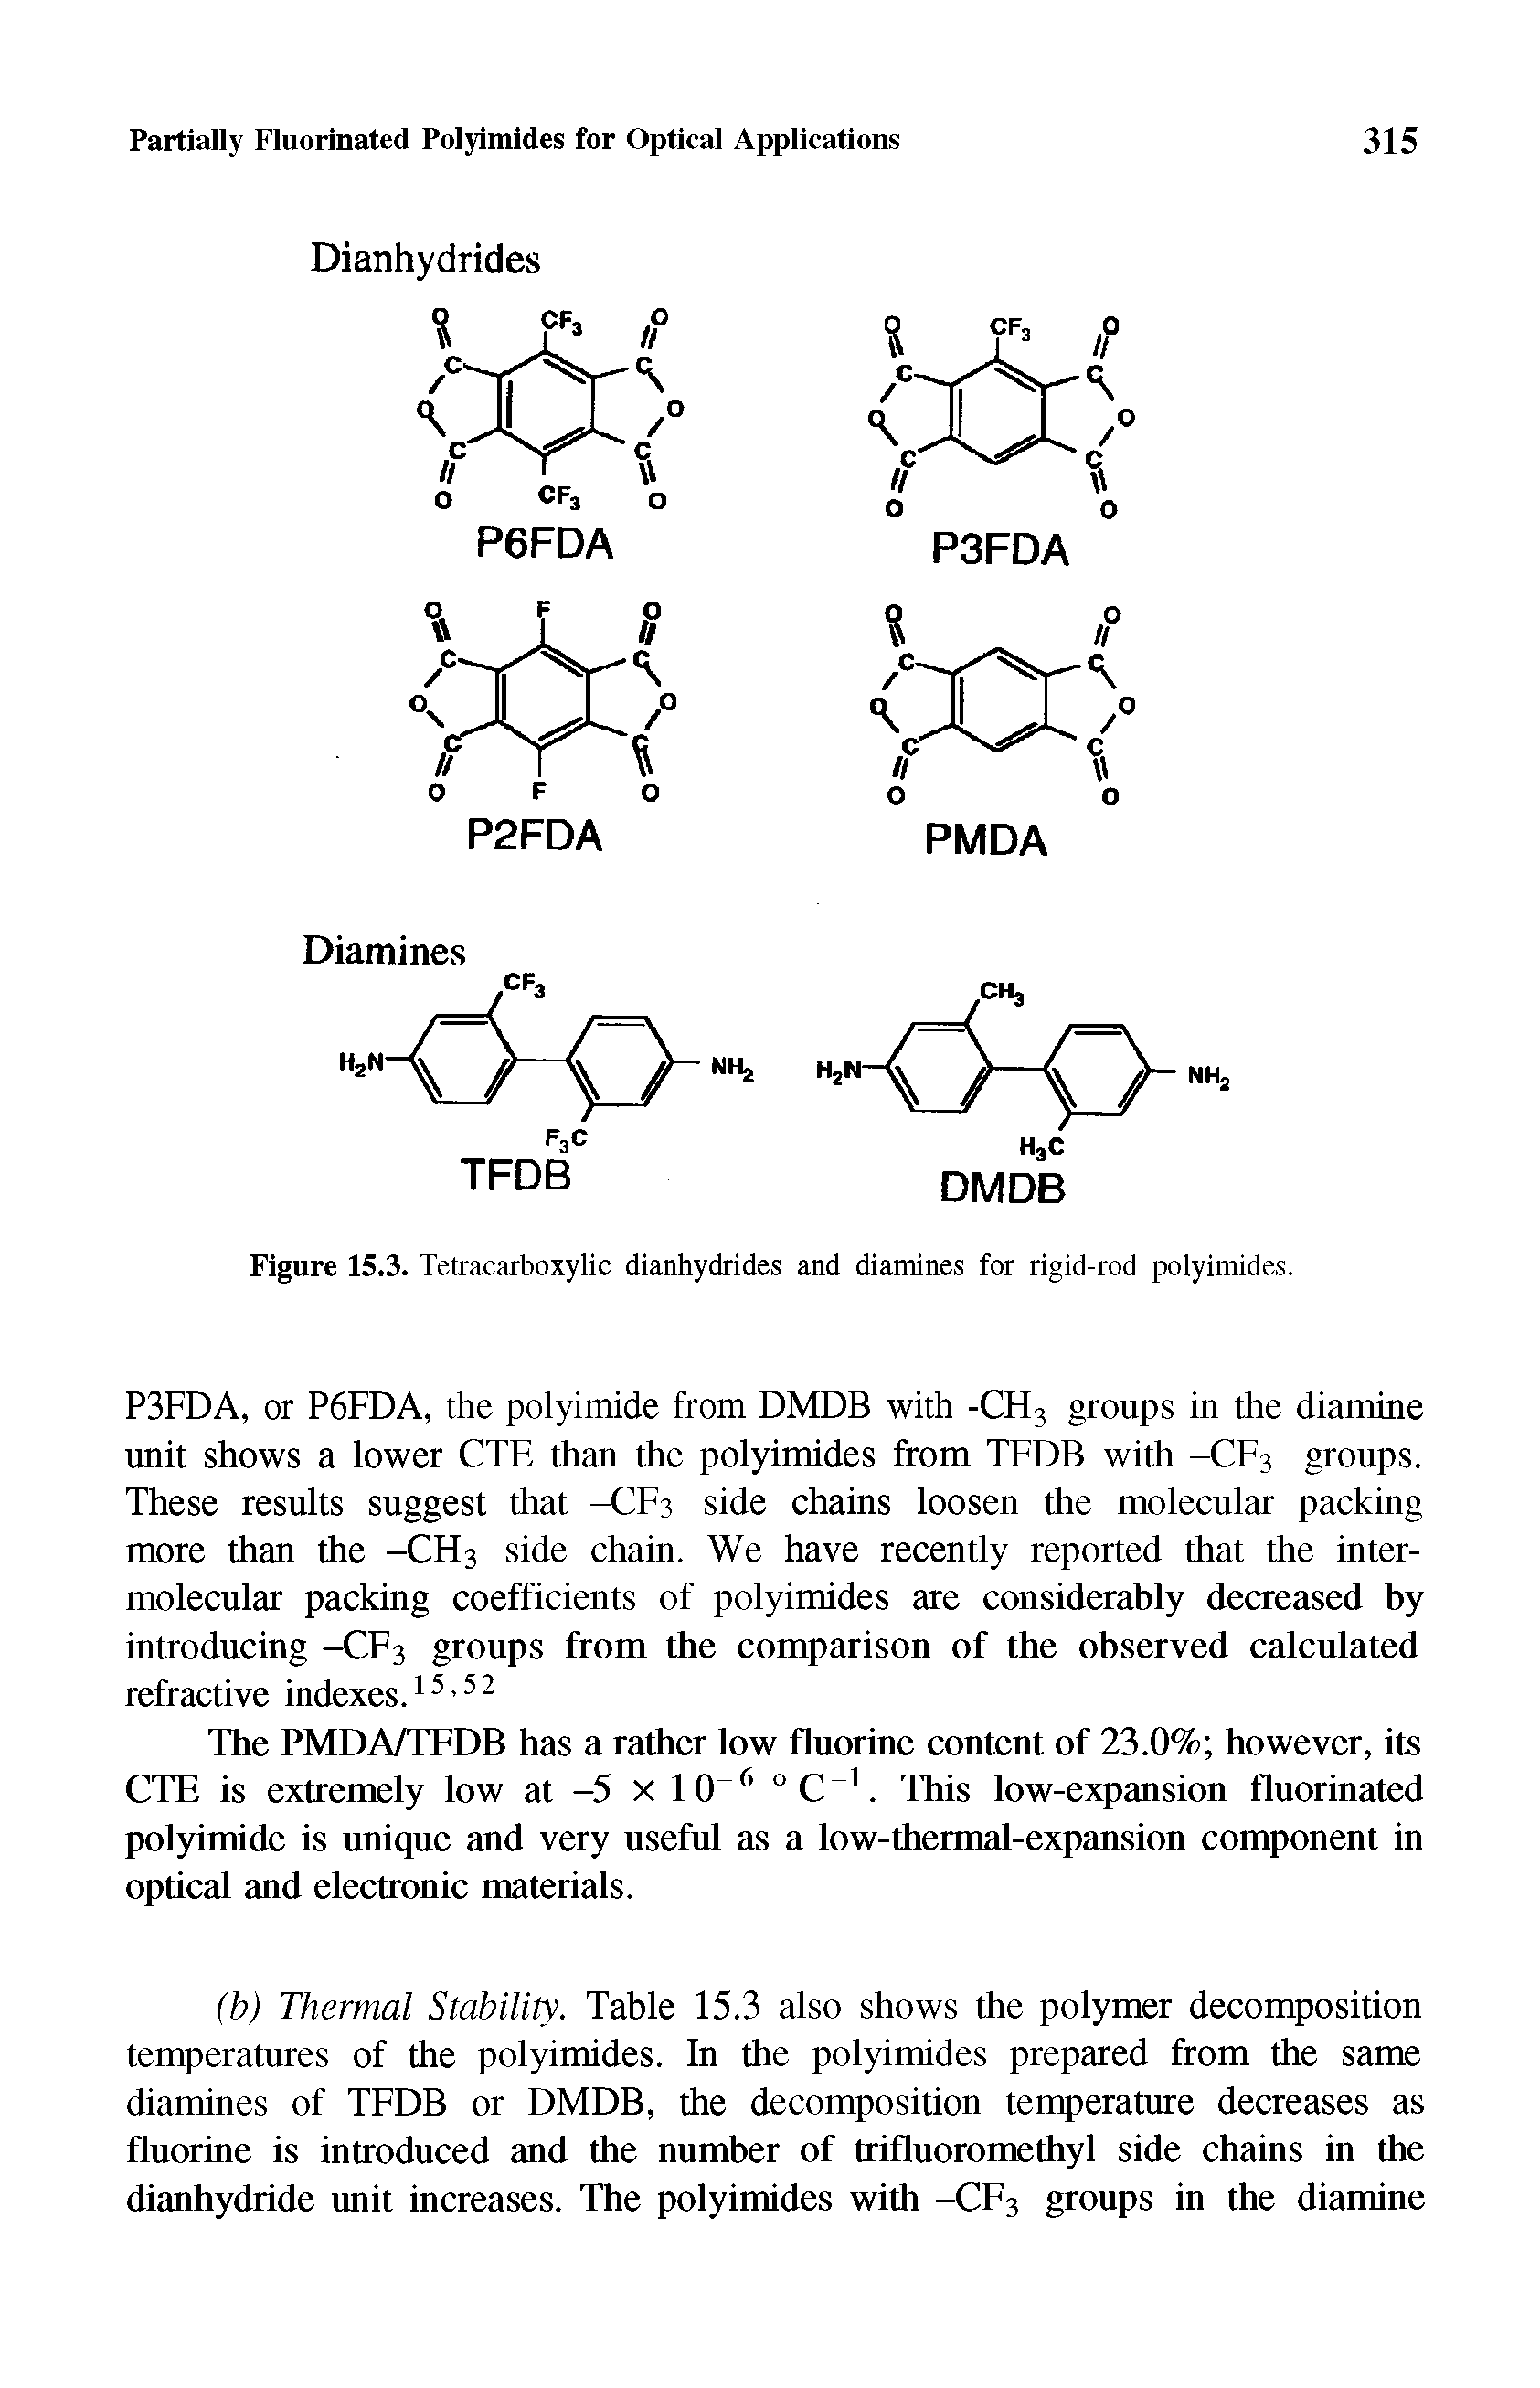 Figure 15.3. Tetracarboxylic dianhydrides and diamines for rigid-rod polyimides.